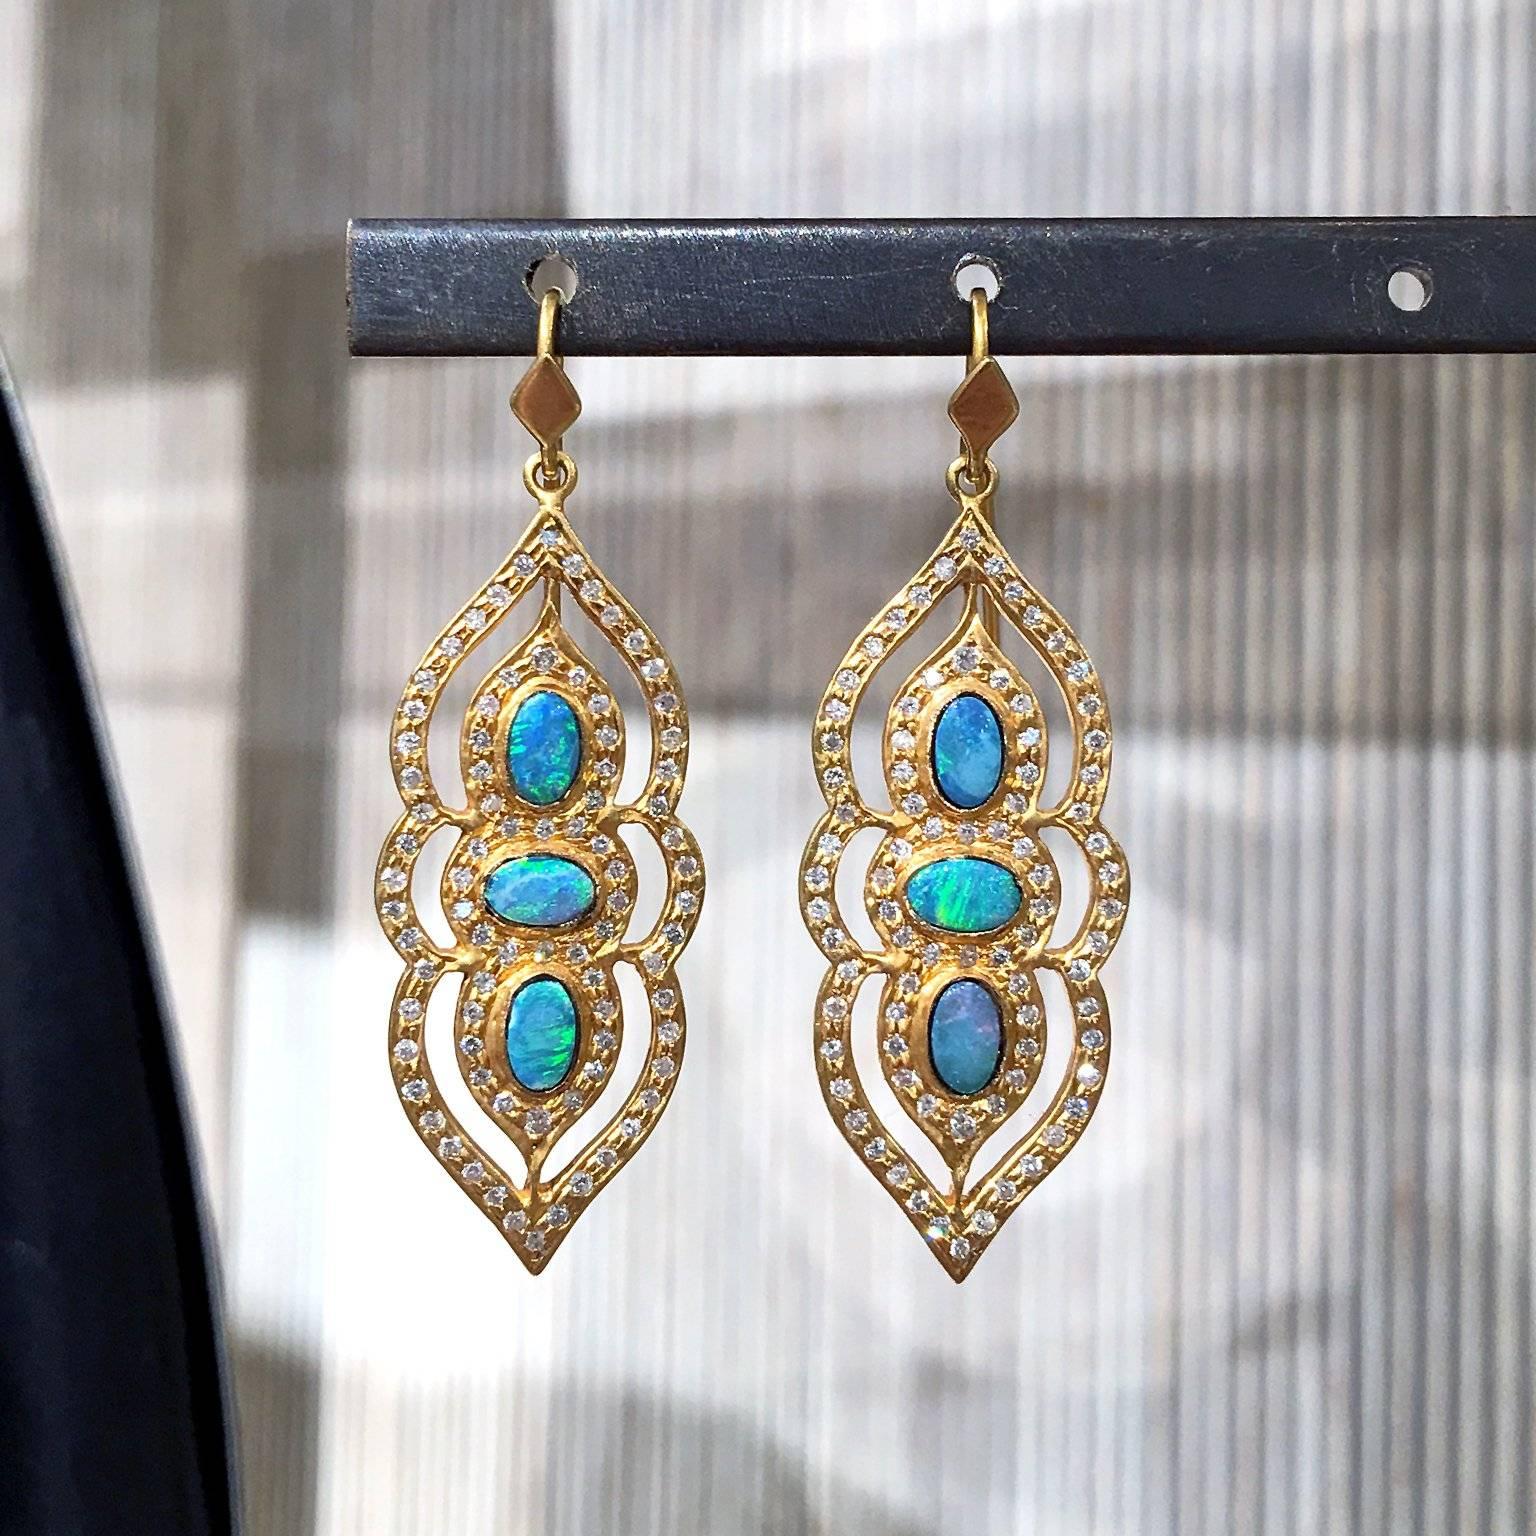 One of a Kind Arabesque Drop Earrings handcrafted in matte-finished 18k yellow gold by jewelry artist Lauren Harper with six vibrant boulder opal doublet oval cabochons and accented with 0.91 carats of round brilliant-cut white diamonds. 